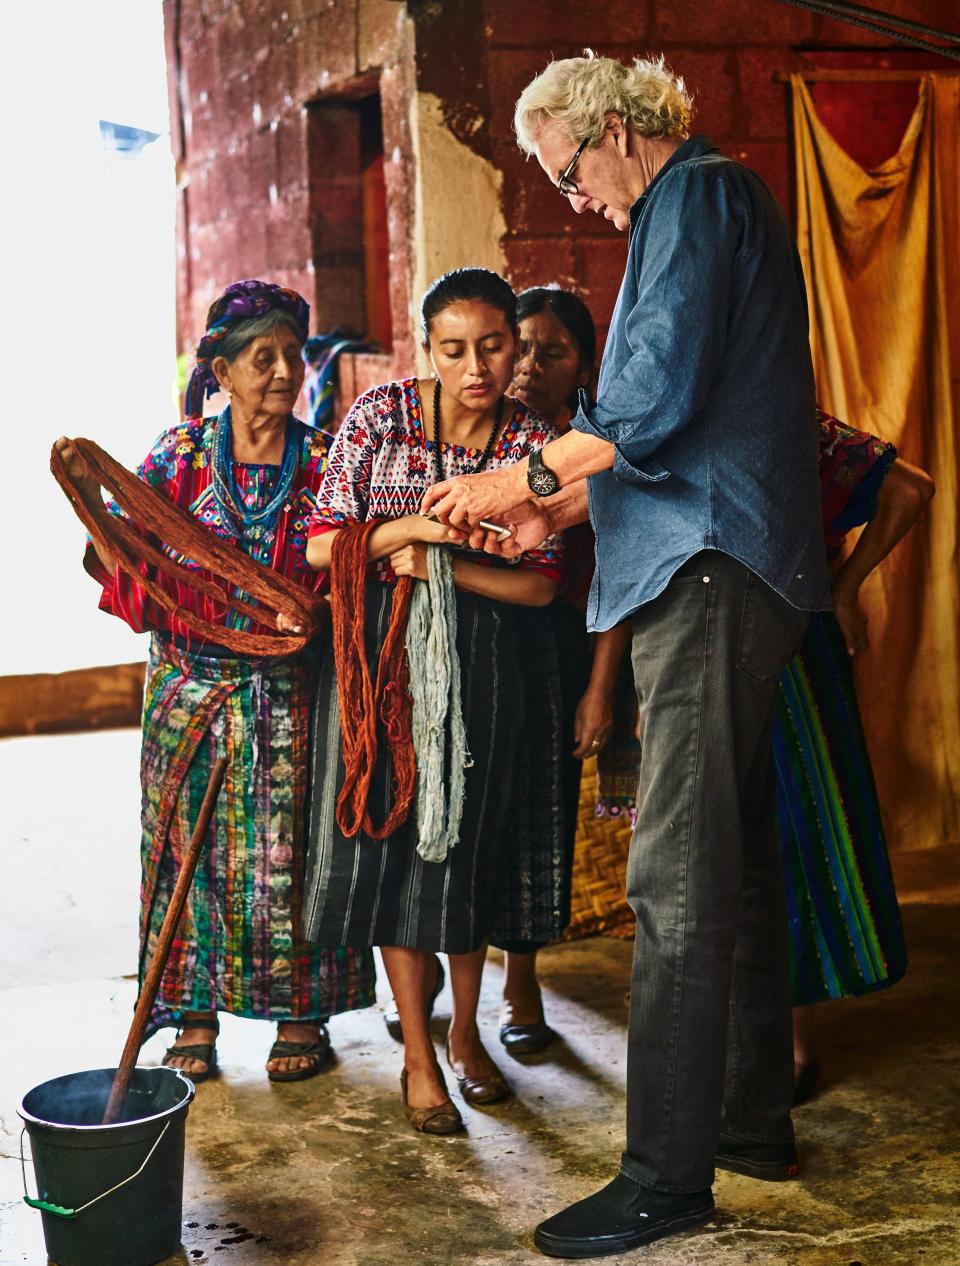 Mitchell Denburg meets with weavers (from left) Octaviana Sente Macajol, Linda Cristal Chile Garcia, and Magna Garcia Chile.